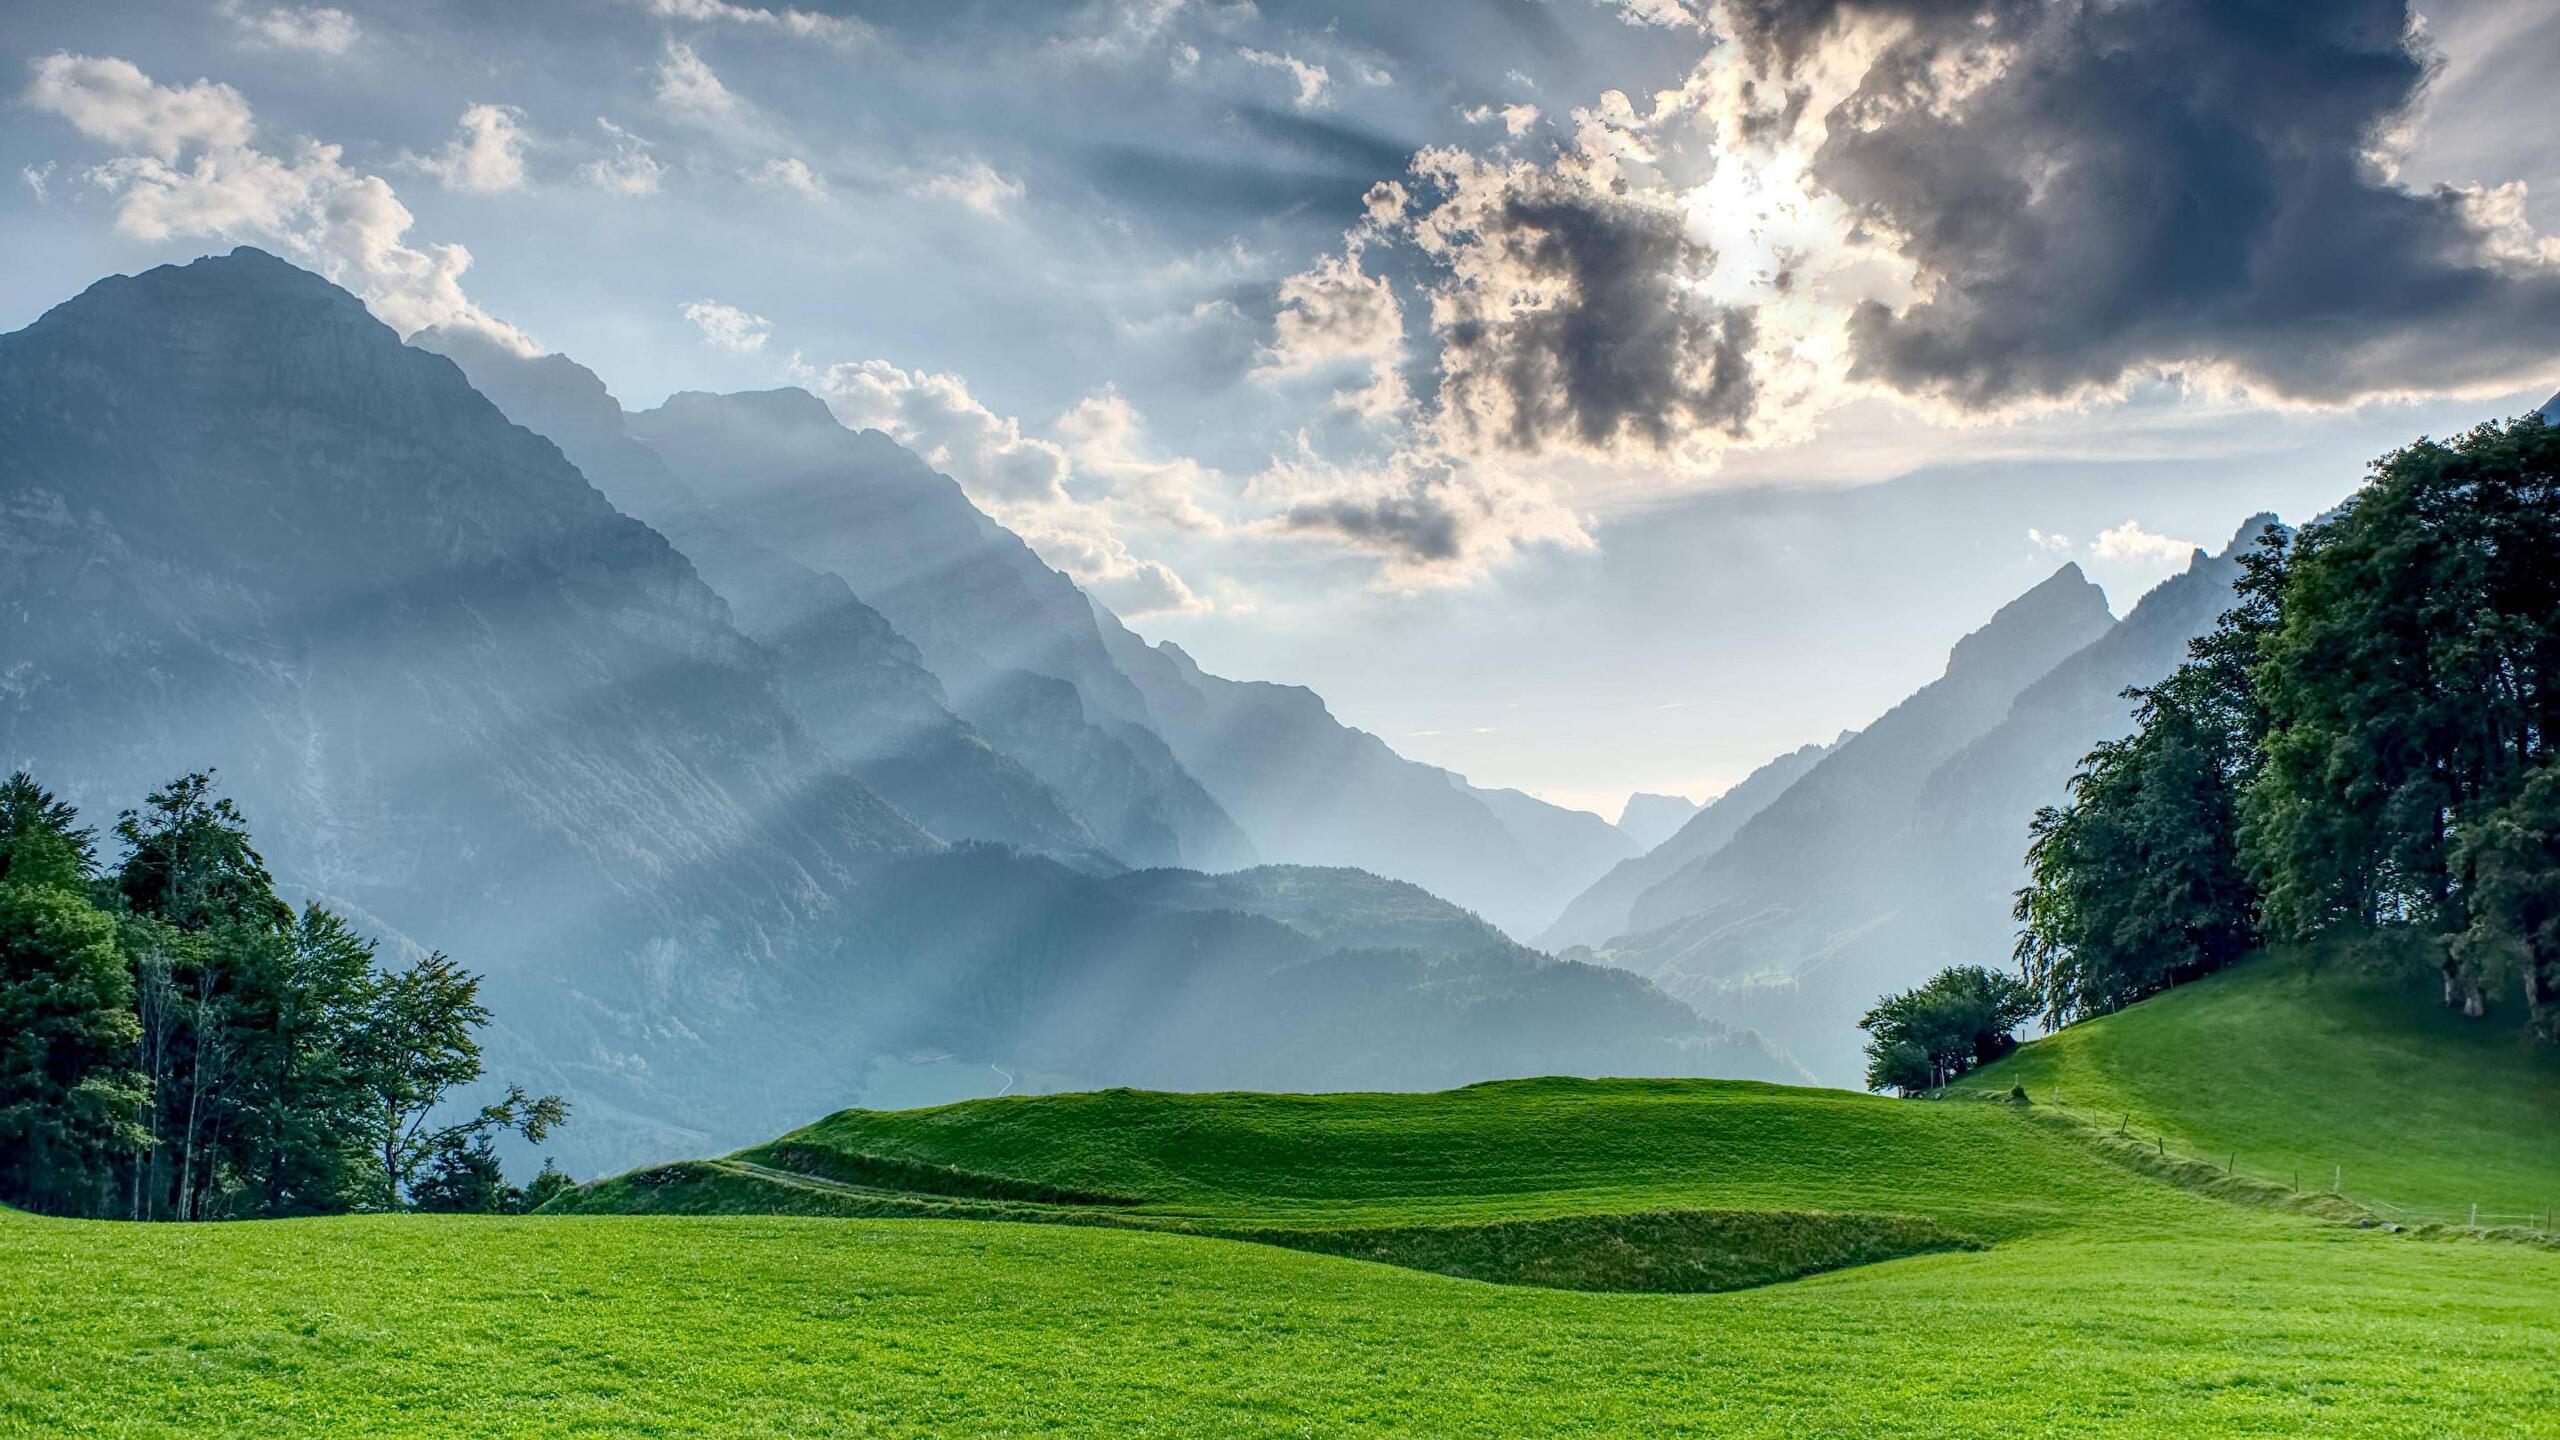 Idyllic Summer Landscape With Mountain Lake In The Alps Stock Photo   Download Image Now  iStock